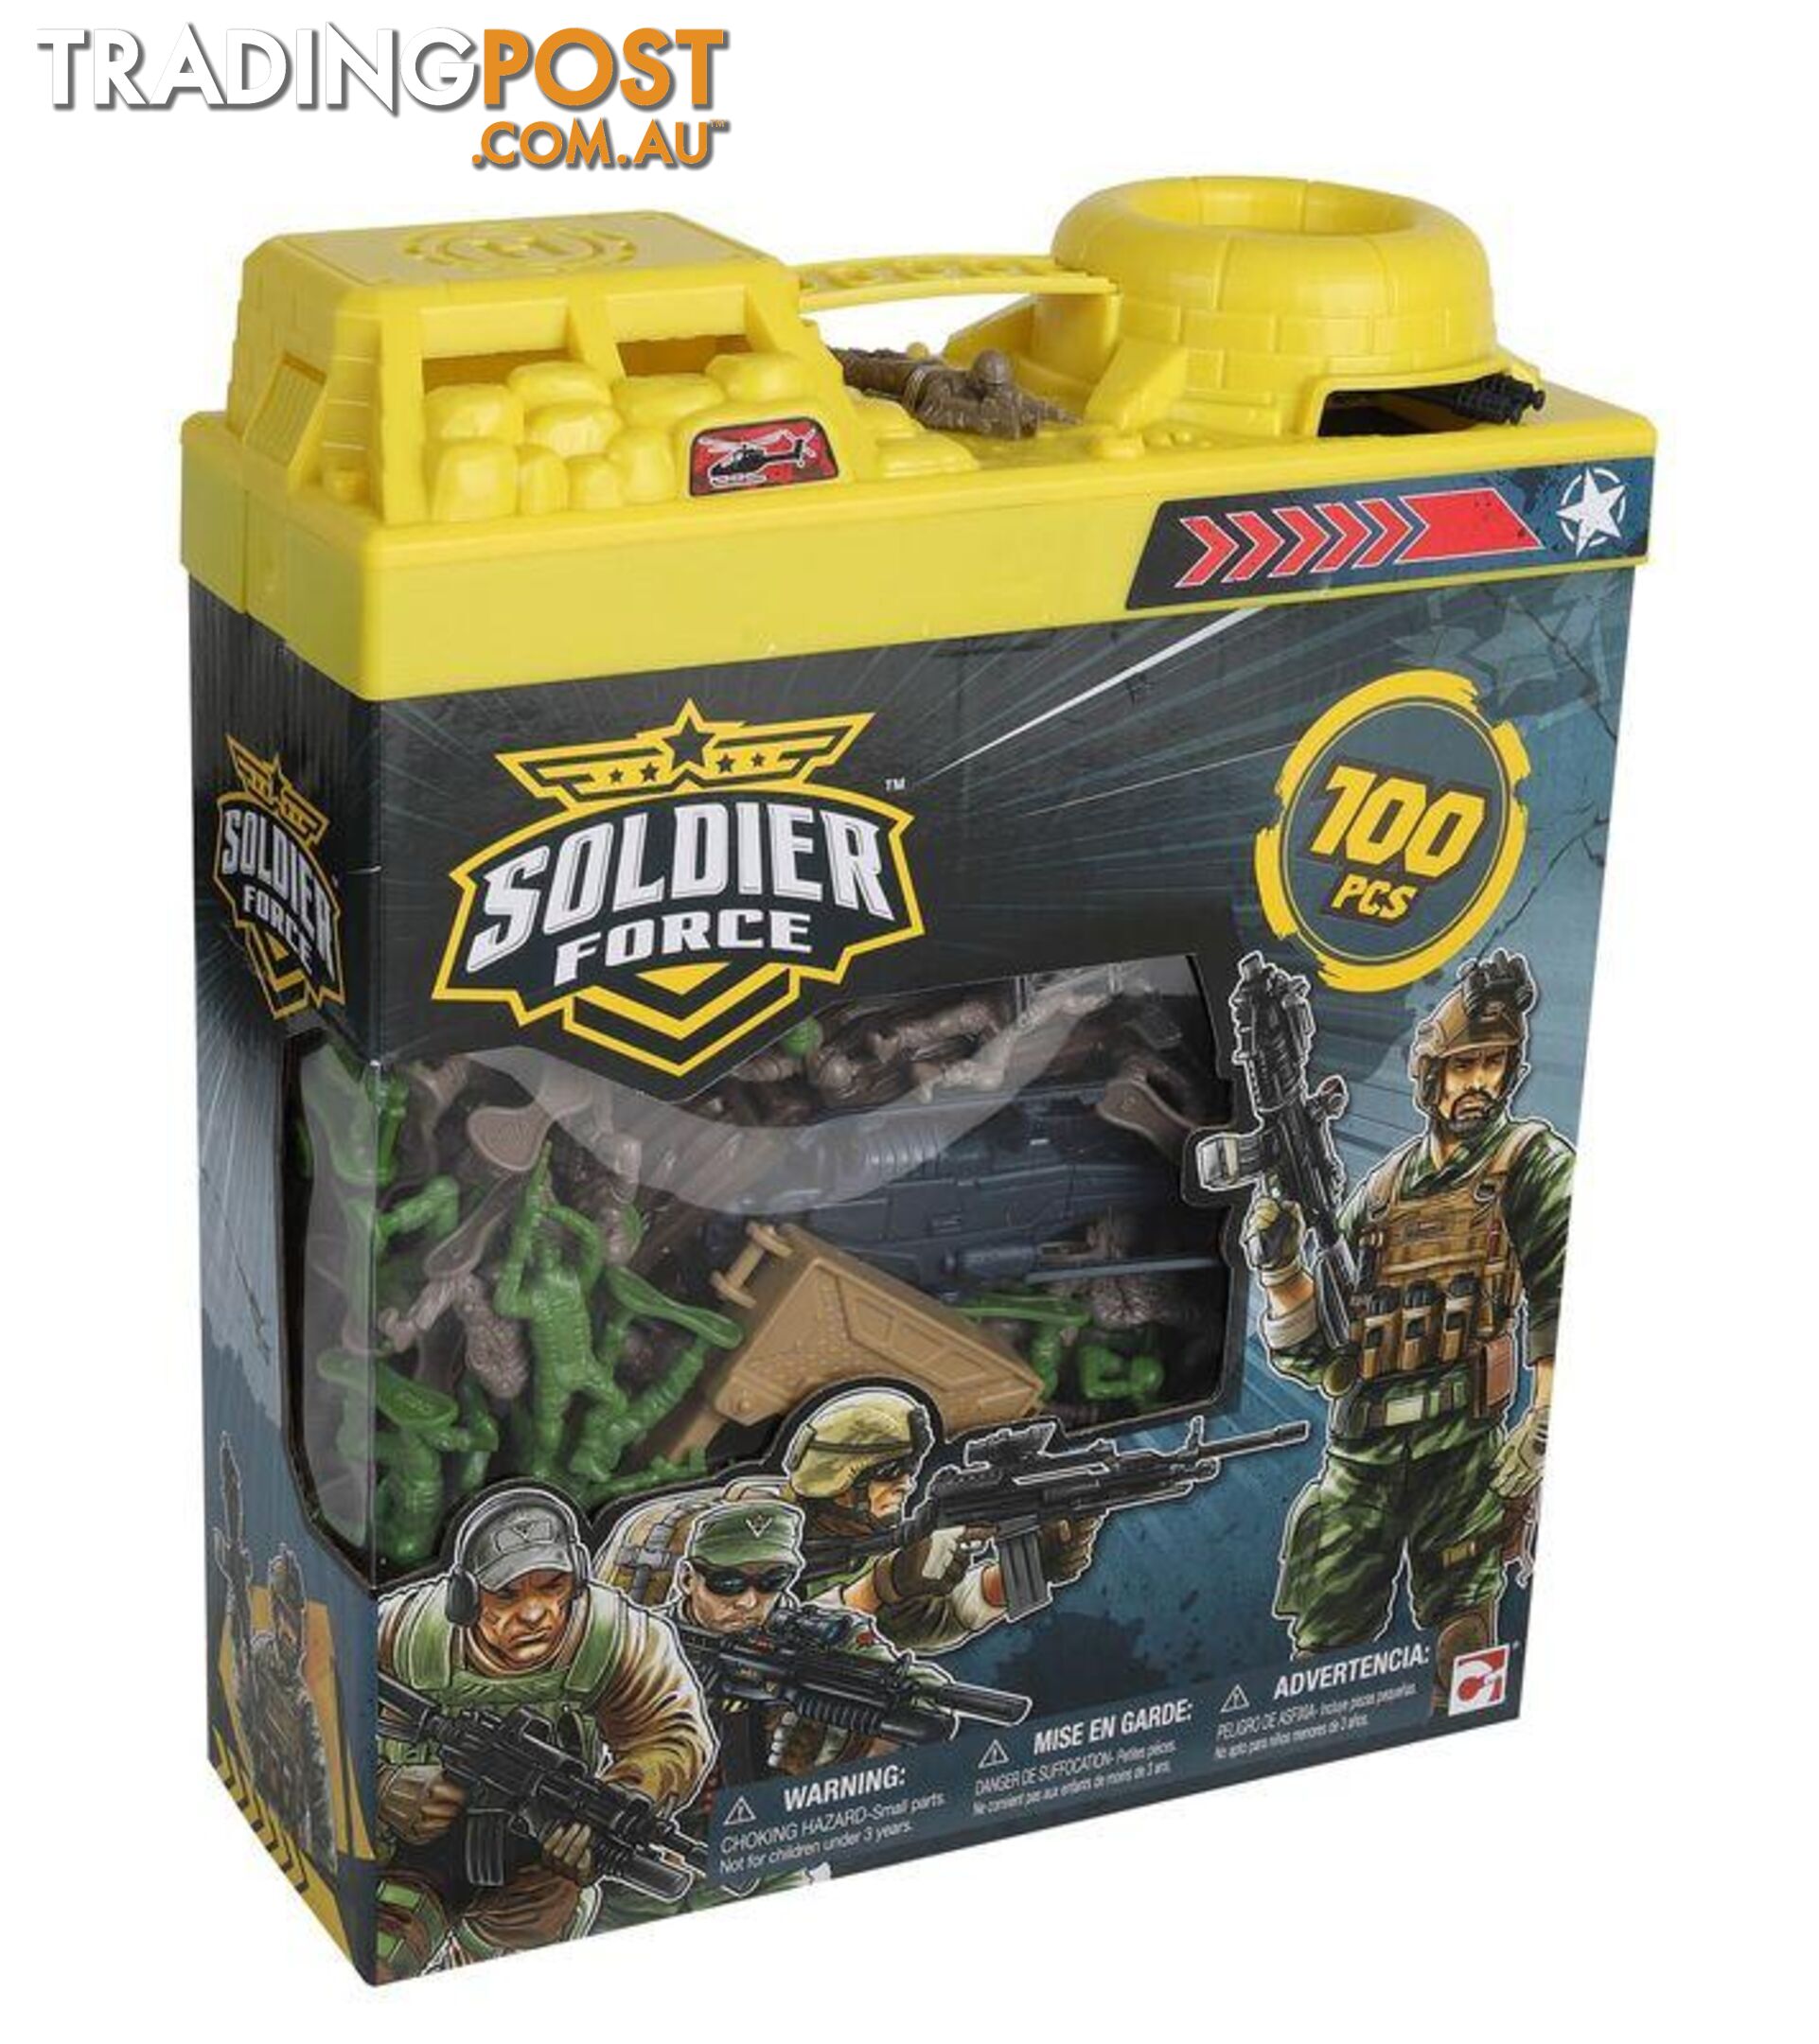 Soldier Force Bucket Of Soldiers Playset 100 Pieces Art64711 - 4893808450322